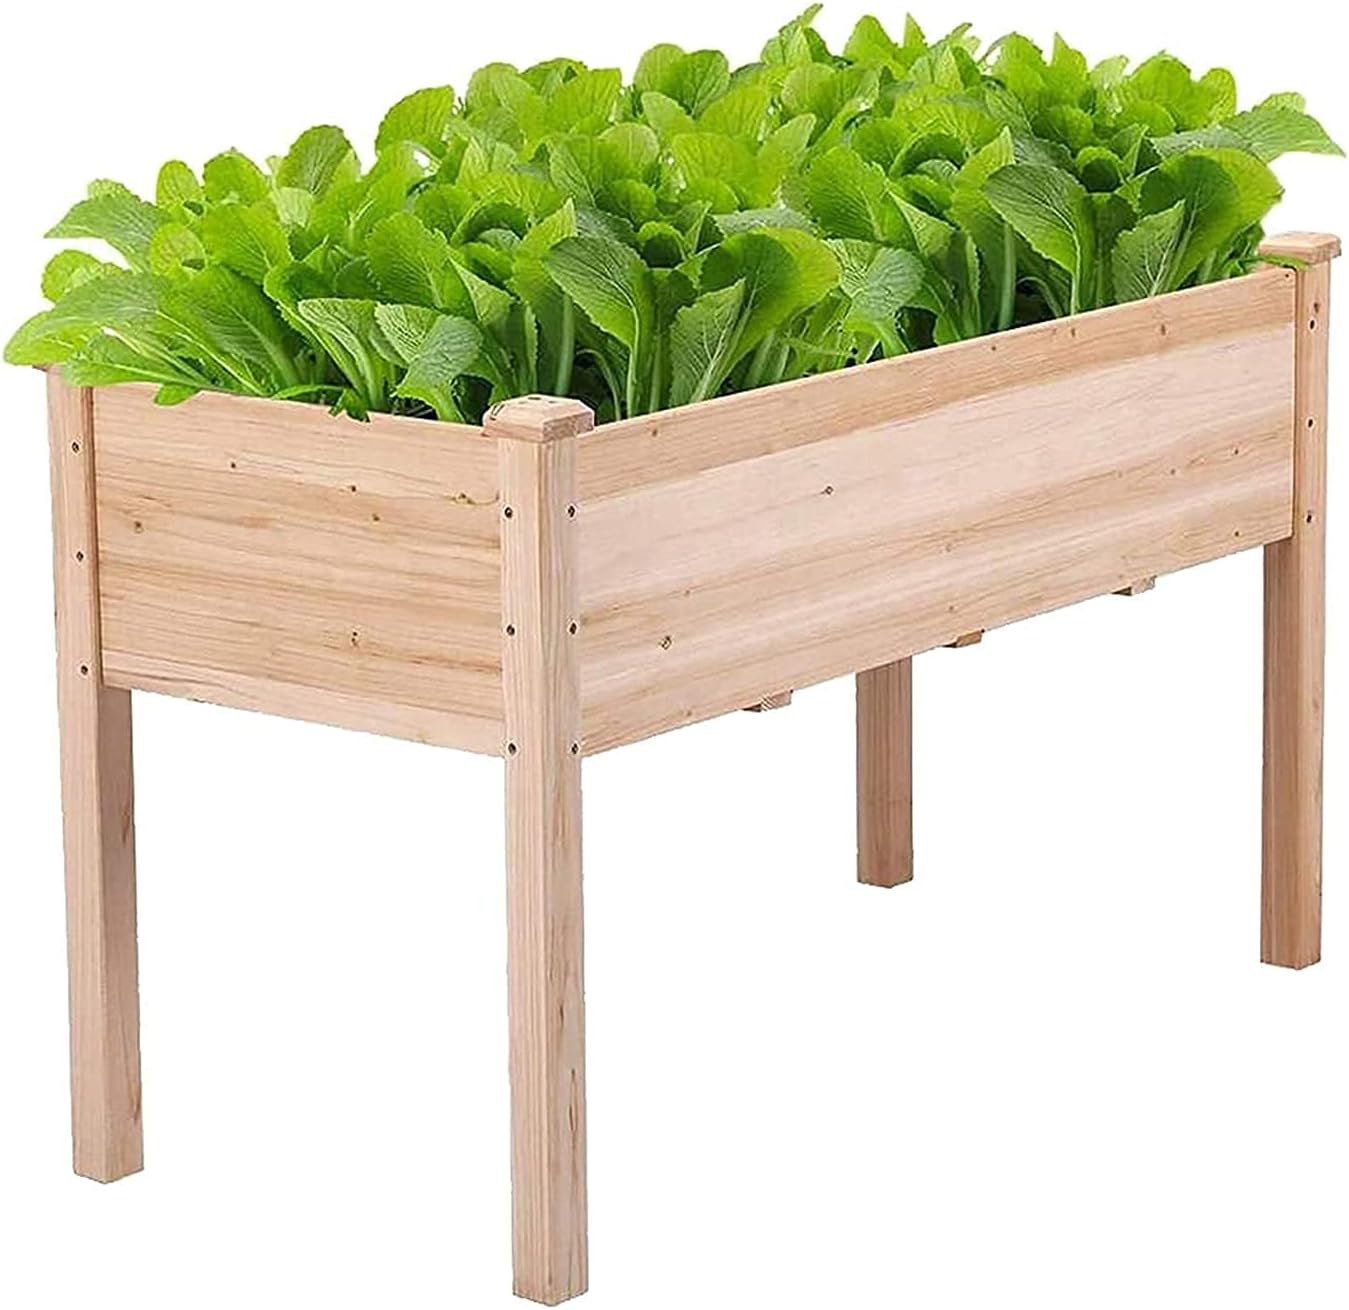 Wooden Plant Raised Bed - Garden Beds for Vegetables Outdoor